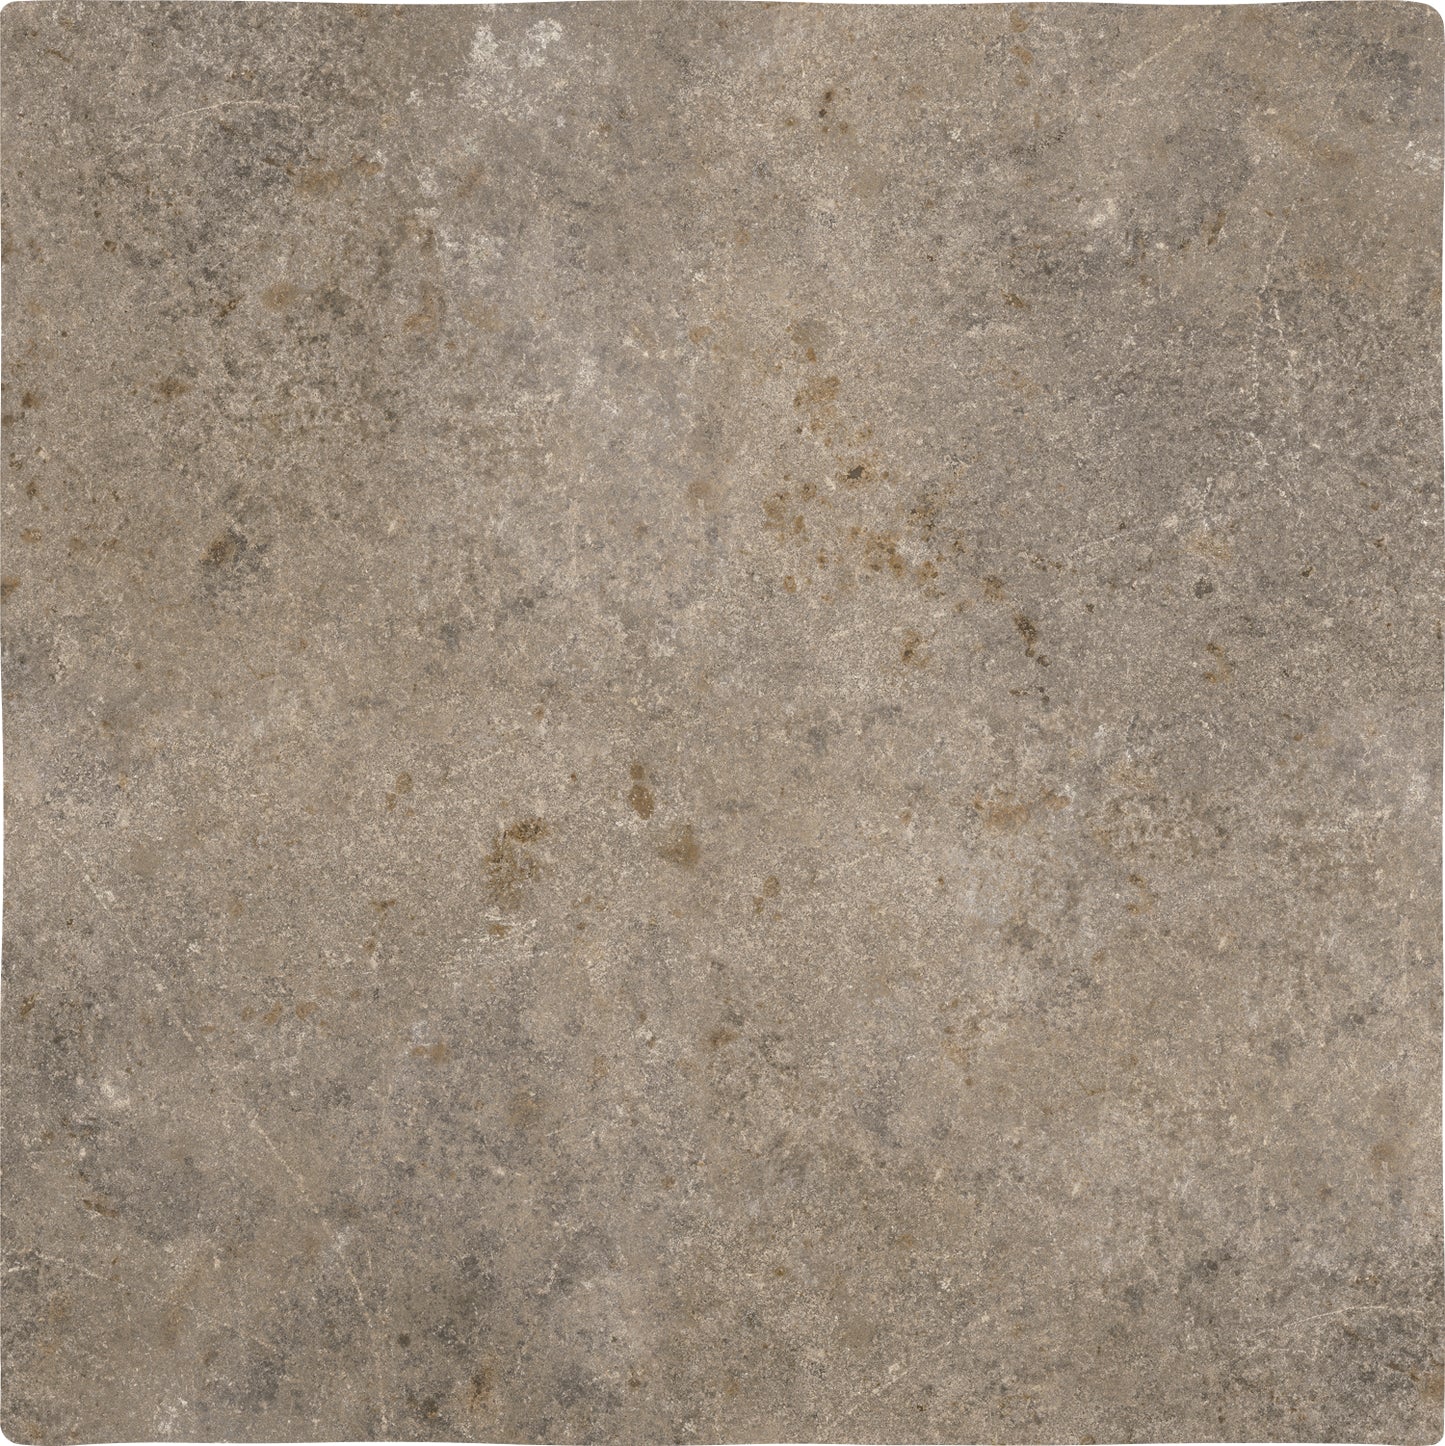 WoW Tile Abbey Stone (please call us for pricing)